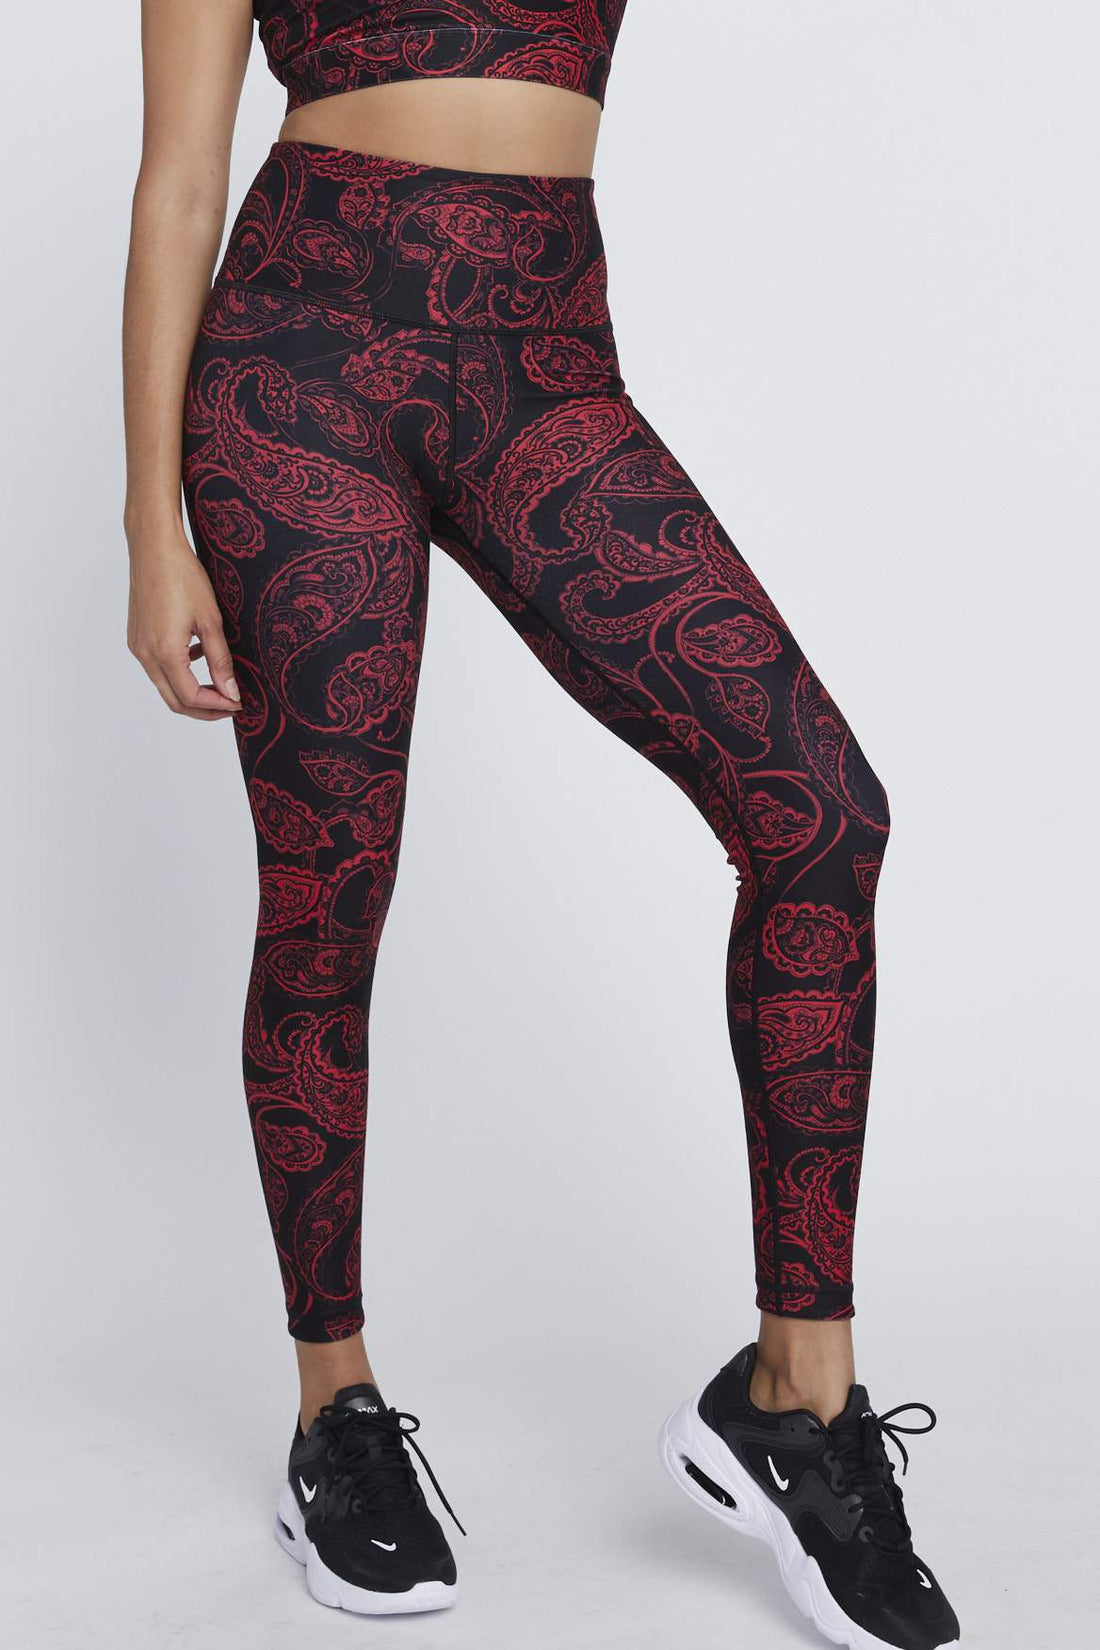 Review: Ultracor Knockout Leggings - Agent Athletica